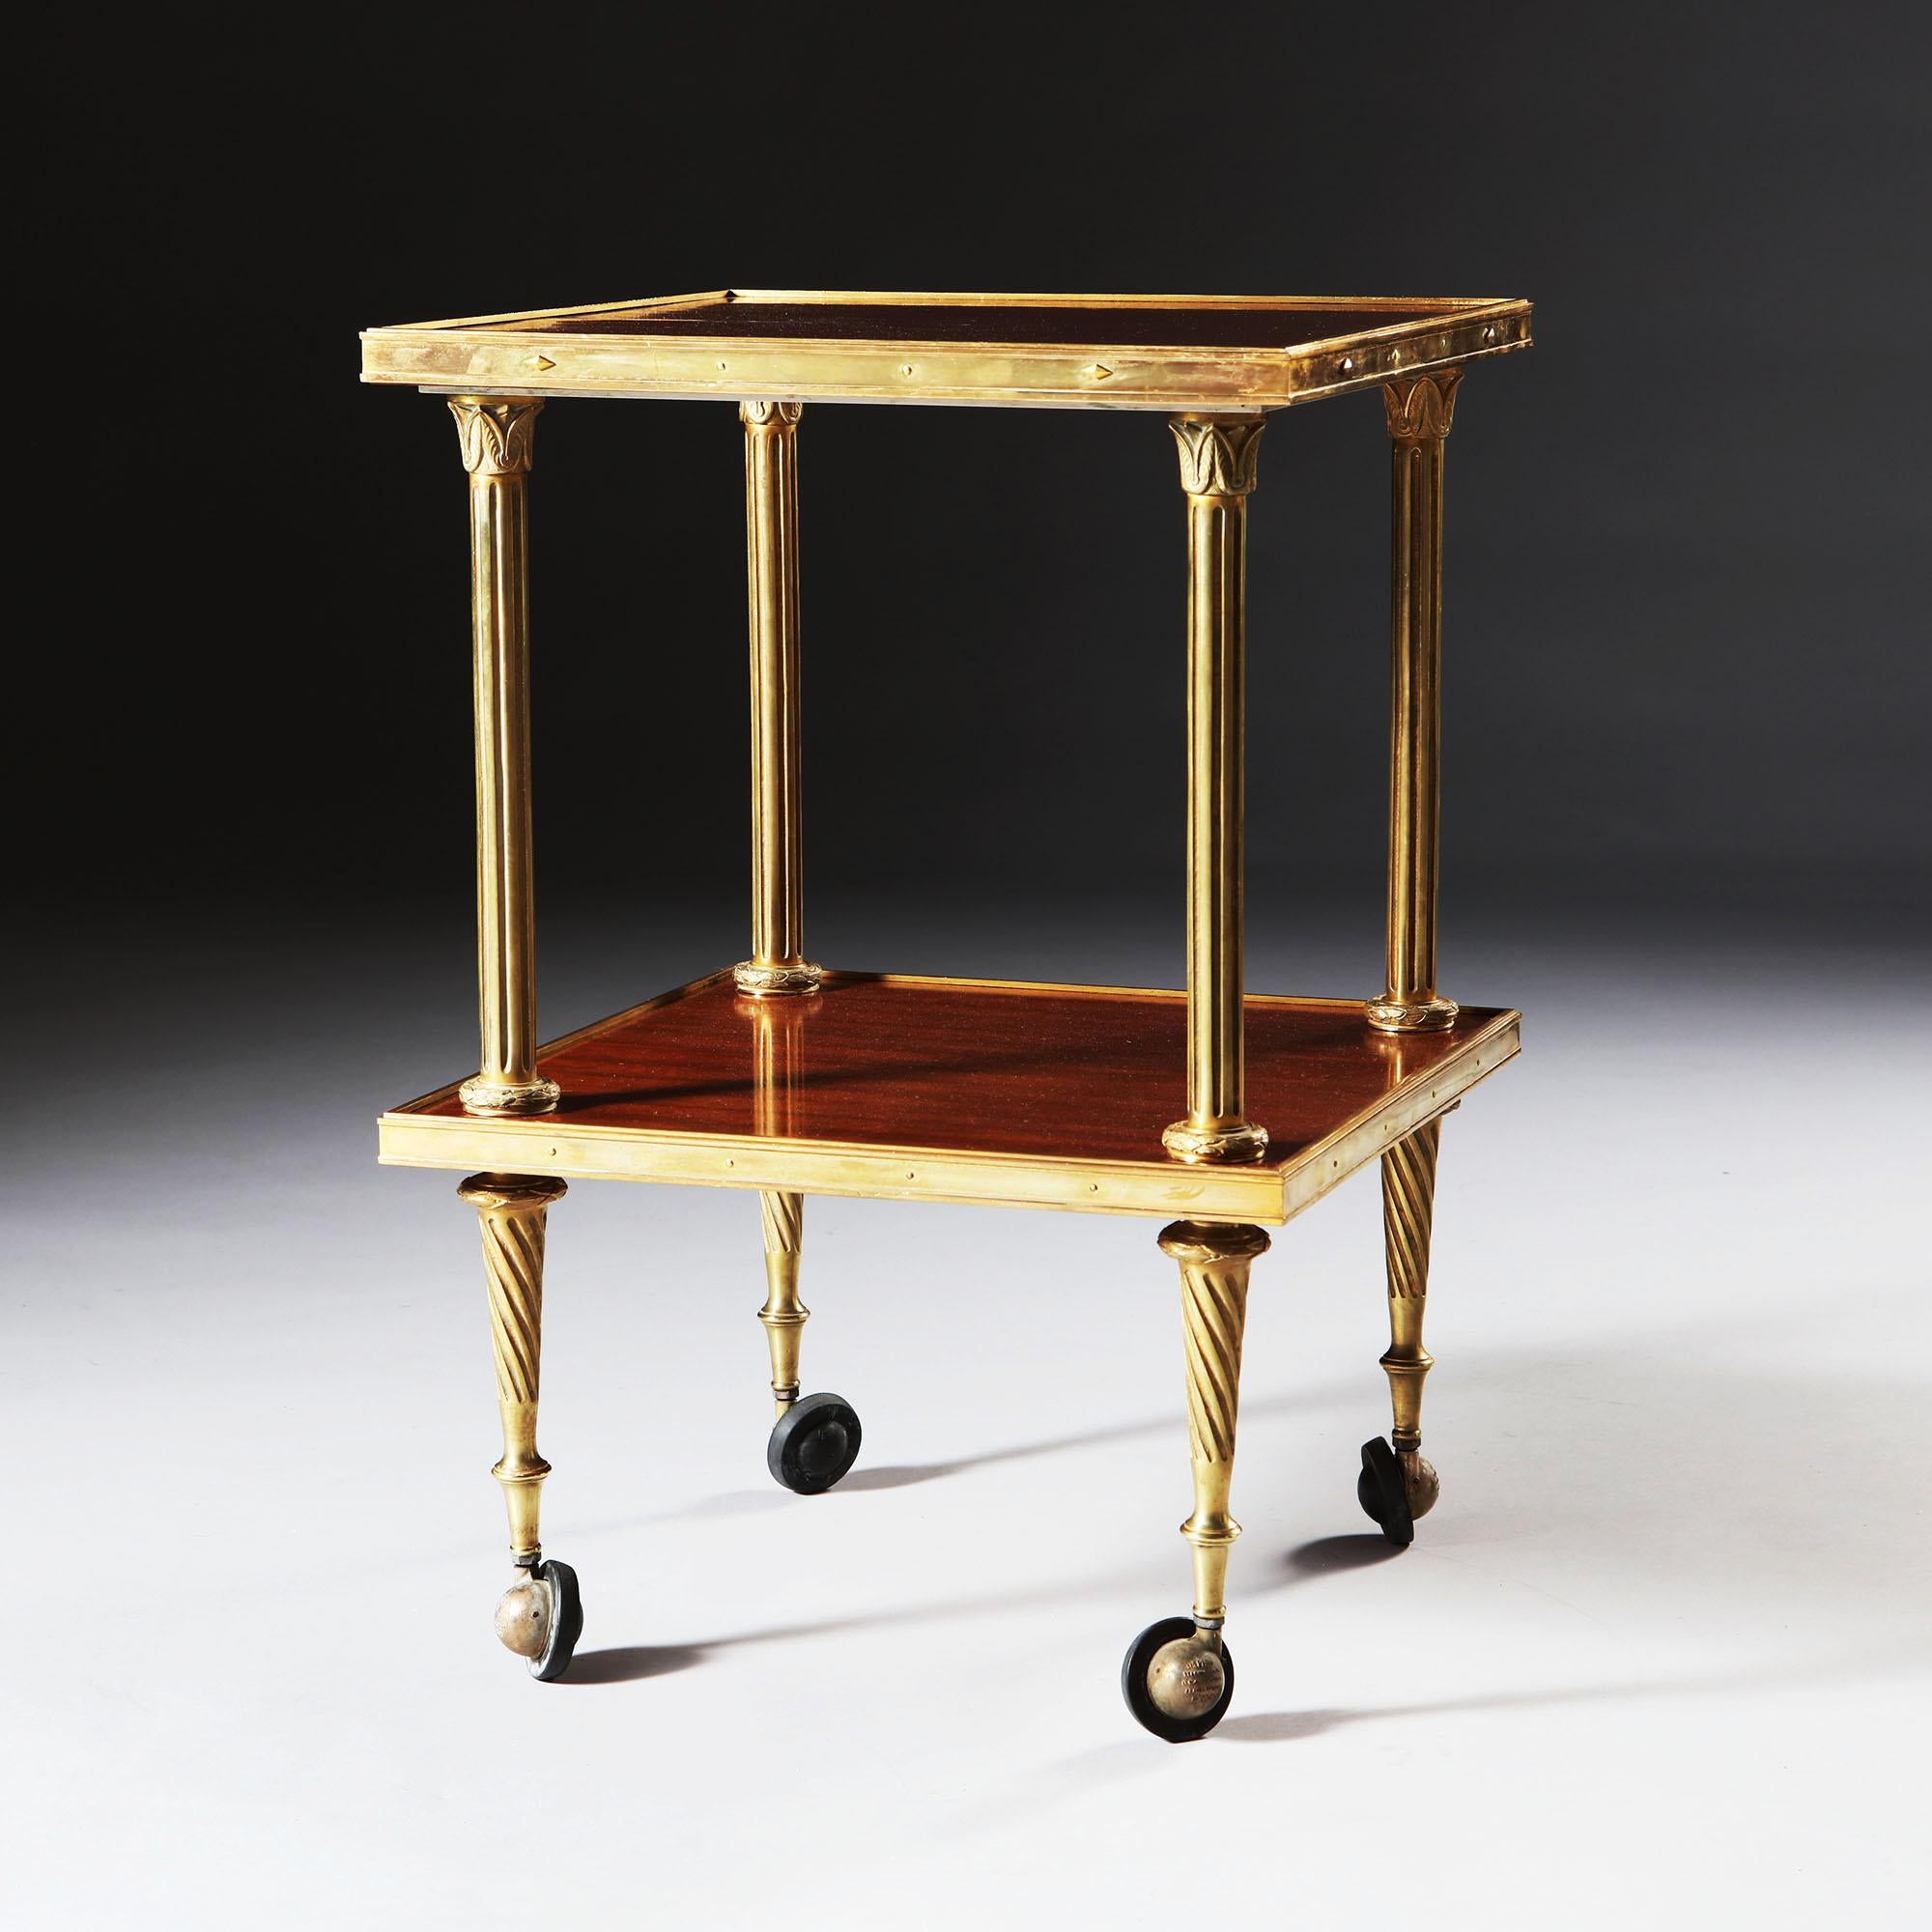 A fine brass and mahogany two-tier étagère by Maison Jansen, with pins and brass diamonds to the brass edges, fluted Corinthian column uprights and brass and rubber castors. Stamped JANSEN to the base.